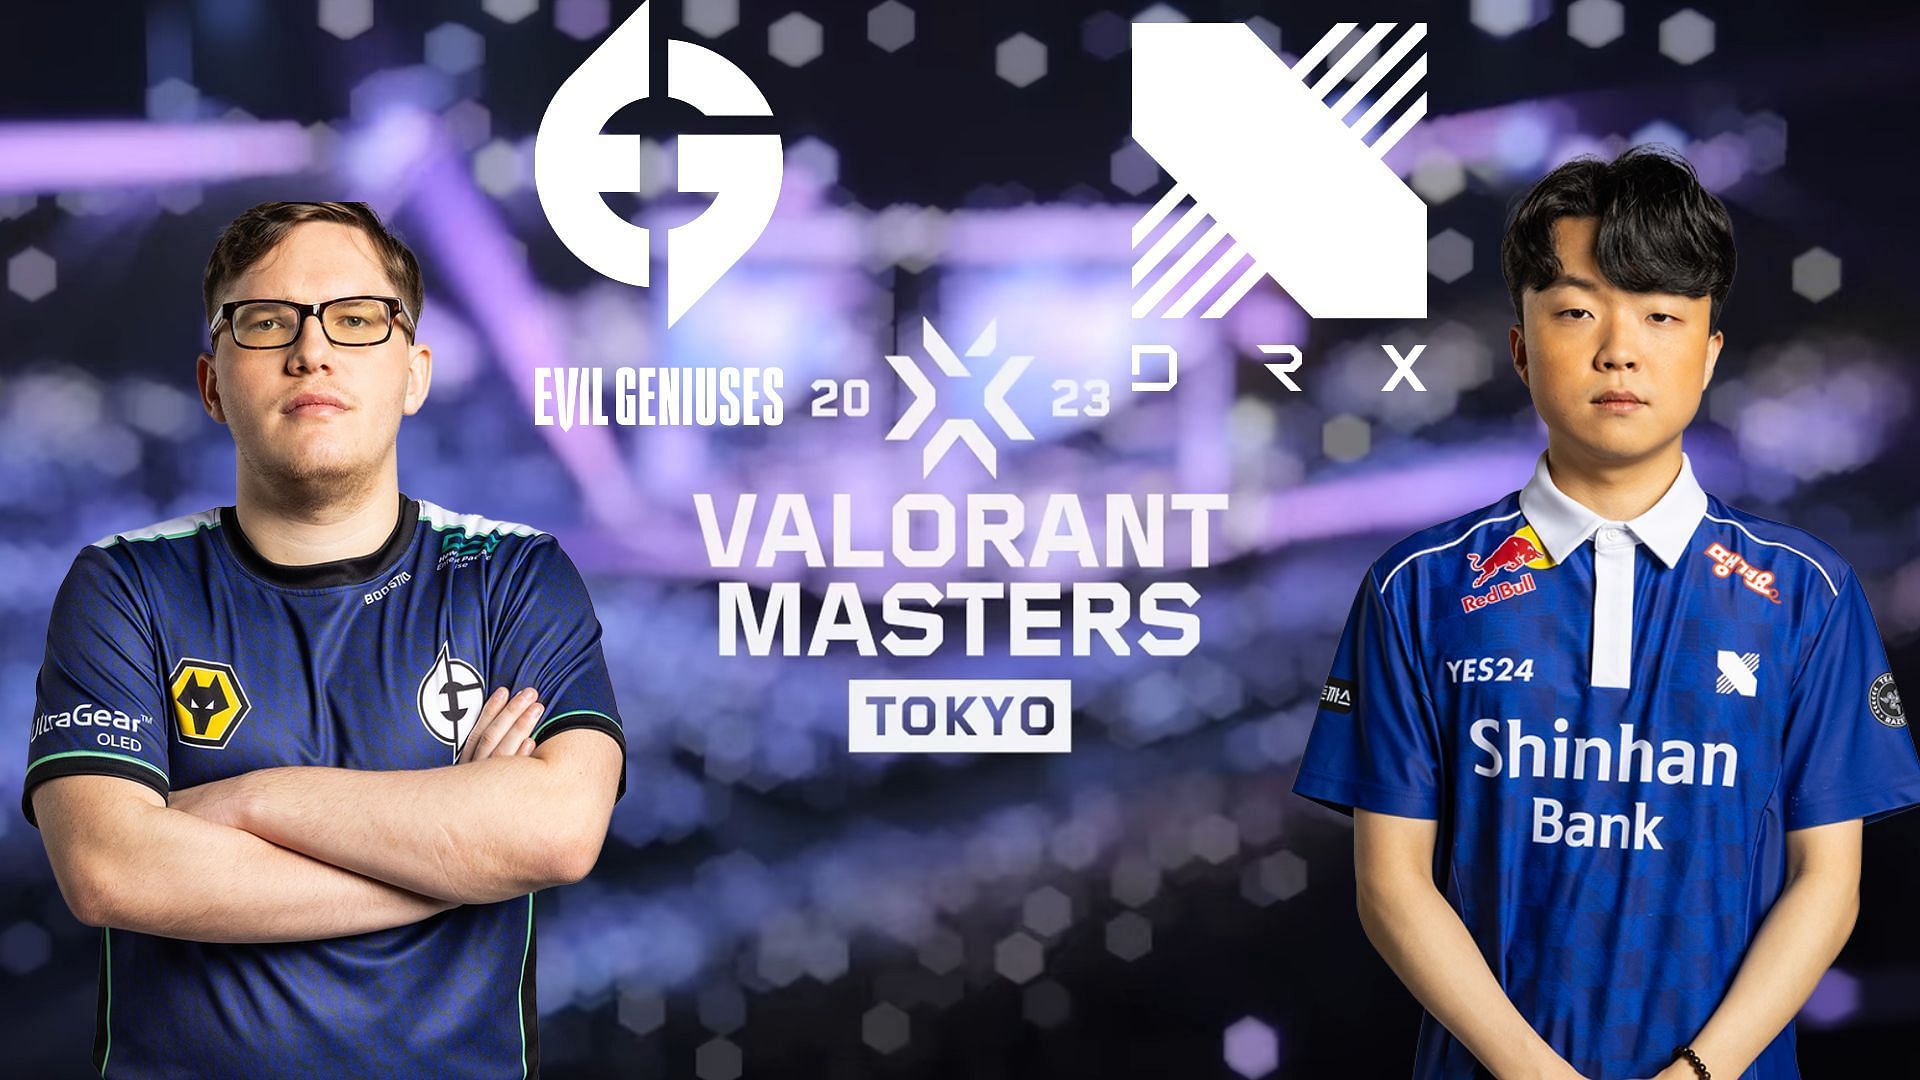 Evil Geniuses and DRX will be an exciting Masters Tokyo series (Image via Sportskeeda)